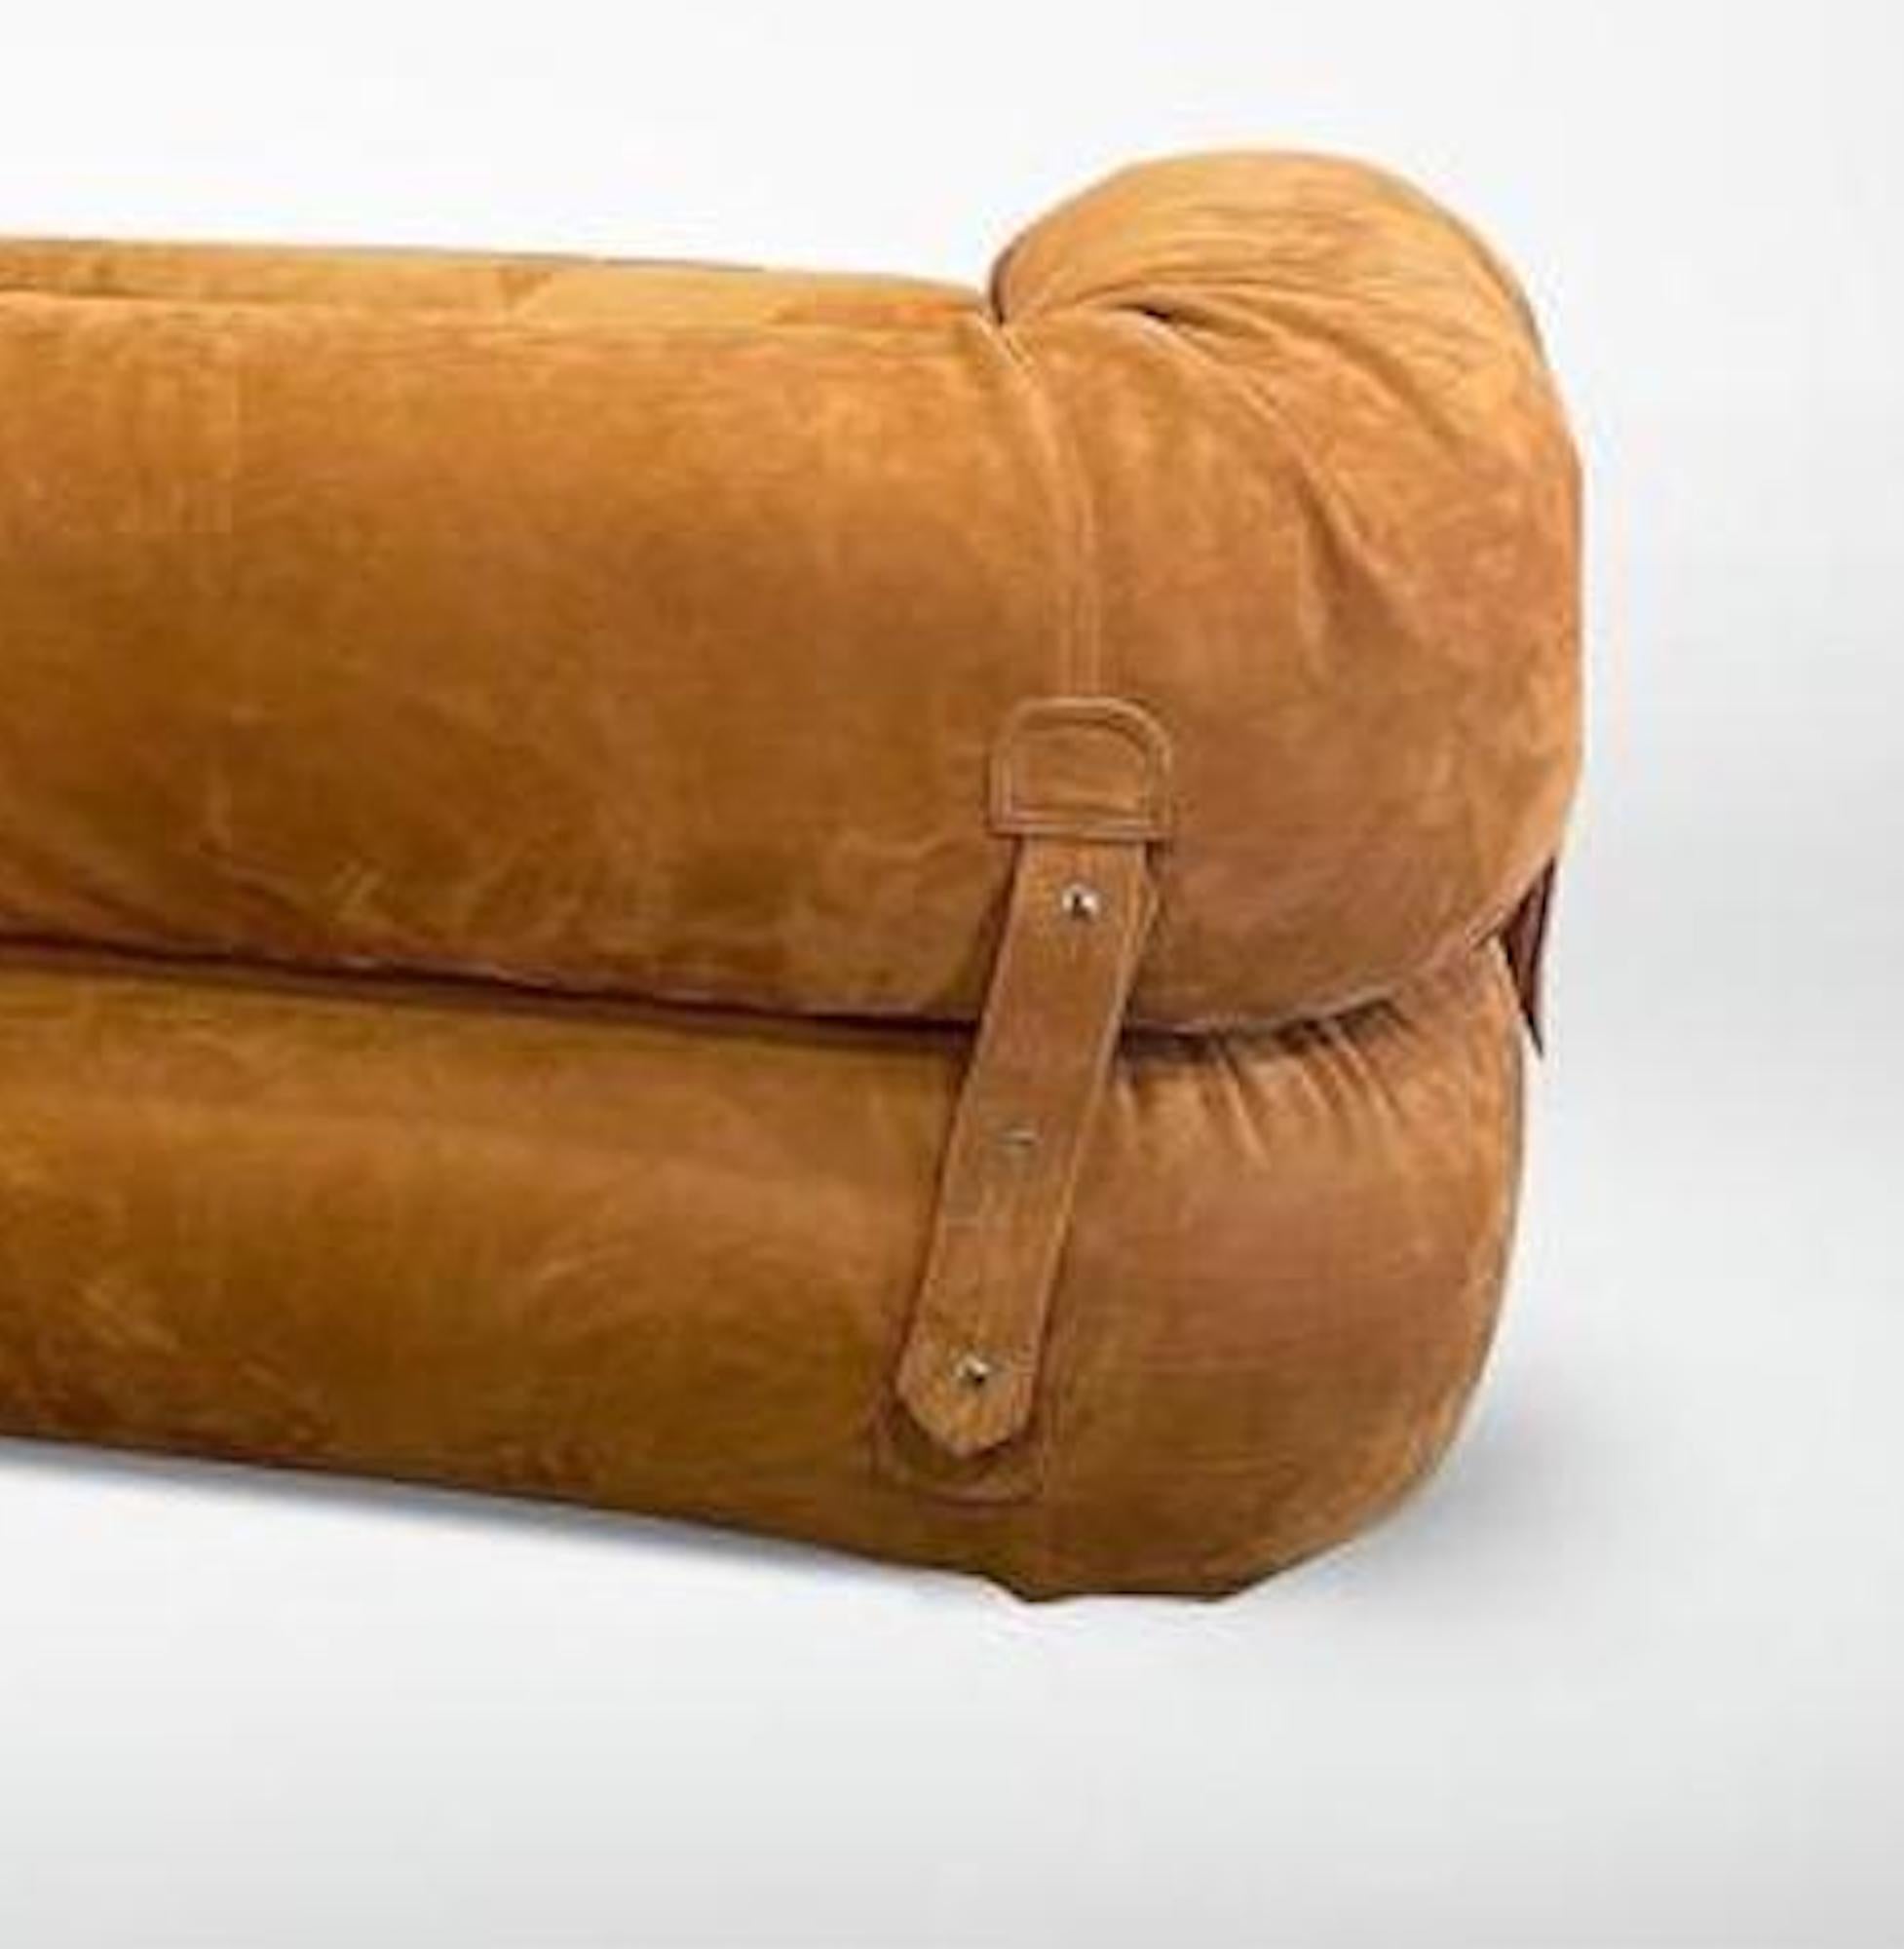 Anfibio 2 seats sofa is a design furniture realized by Alessandro Becchi for Giovannetti in the 1970s.

Brown Suede upholstery

Dimensions: 80 x 170 x 65 cm

Iconic convertible sofa bed.

Very good condition.

 
Anfibio is a sofa bed,